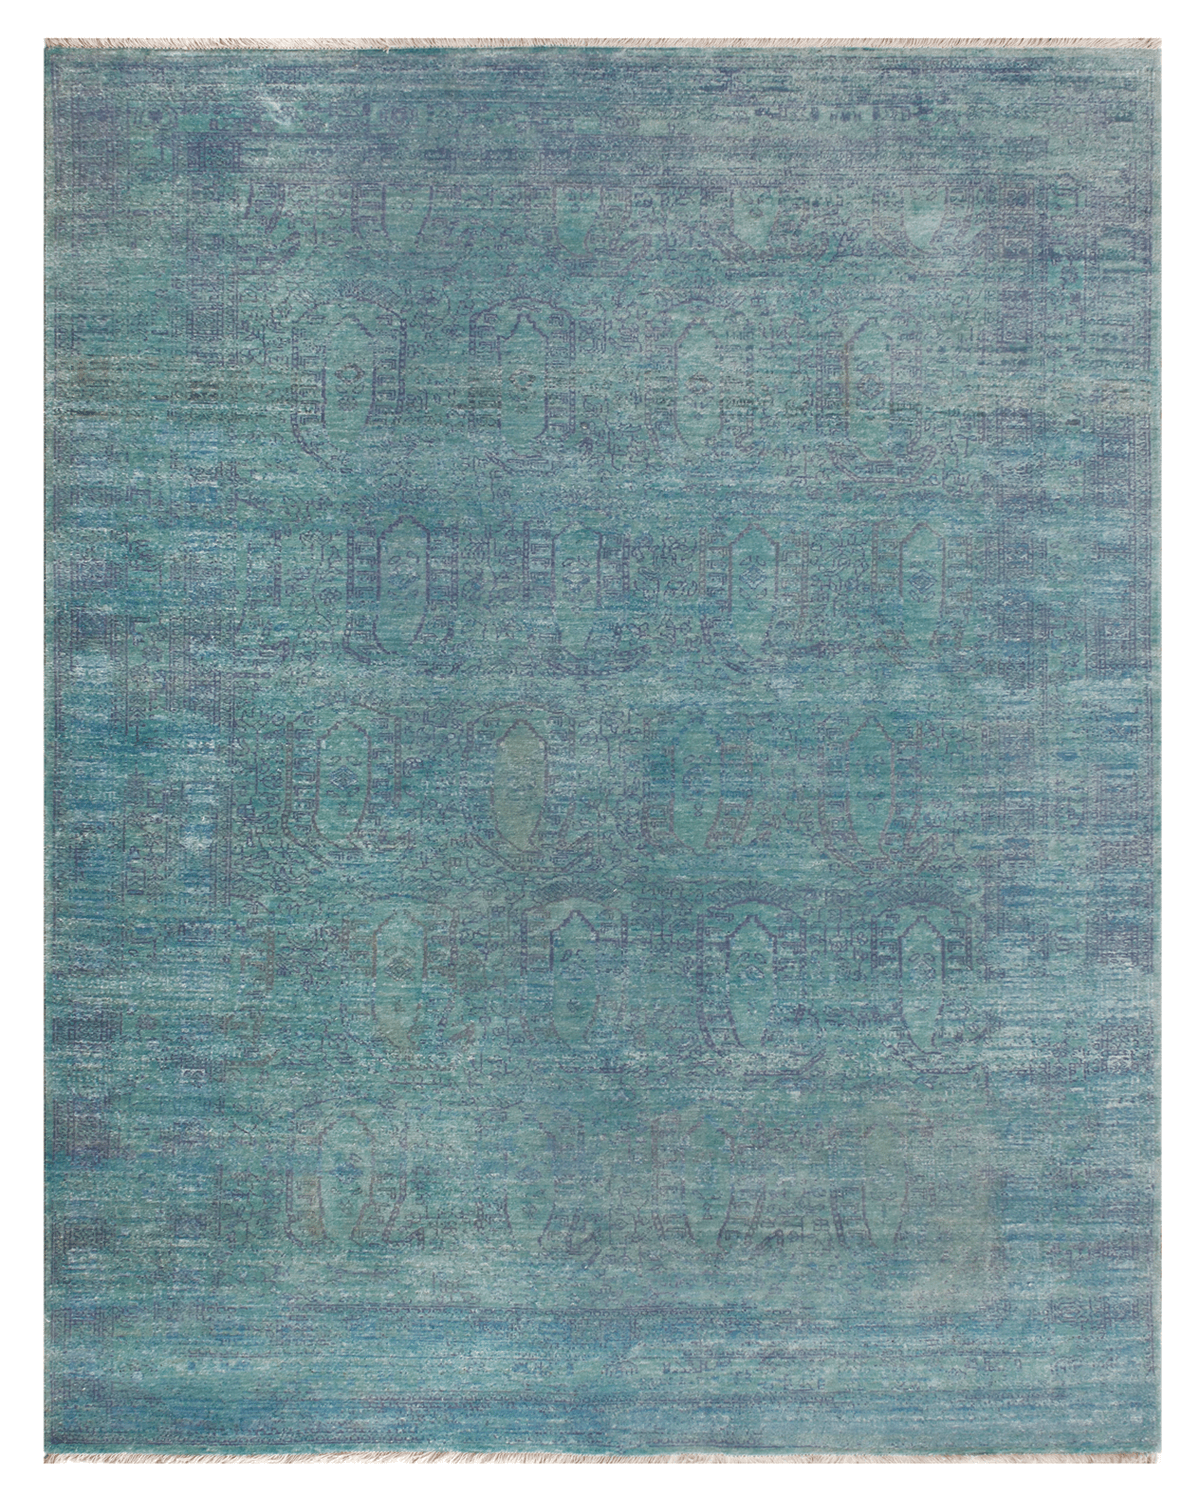 Hand-Knotted Transitional Rug (MRT-1)